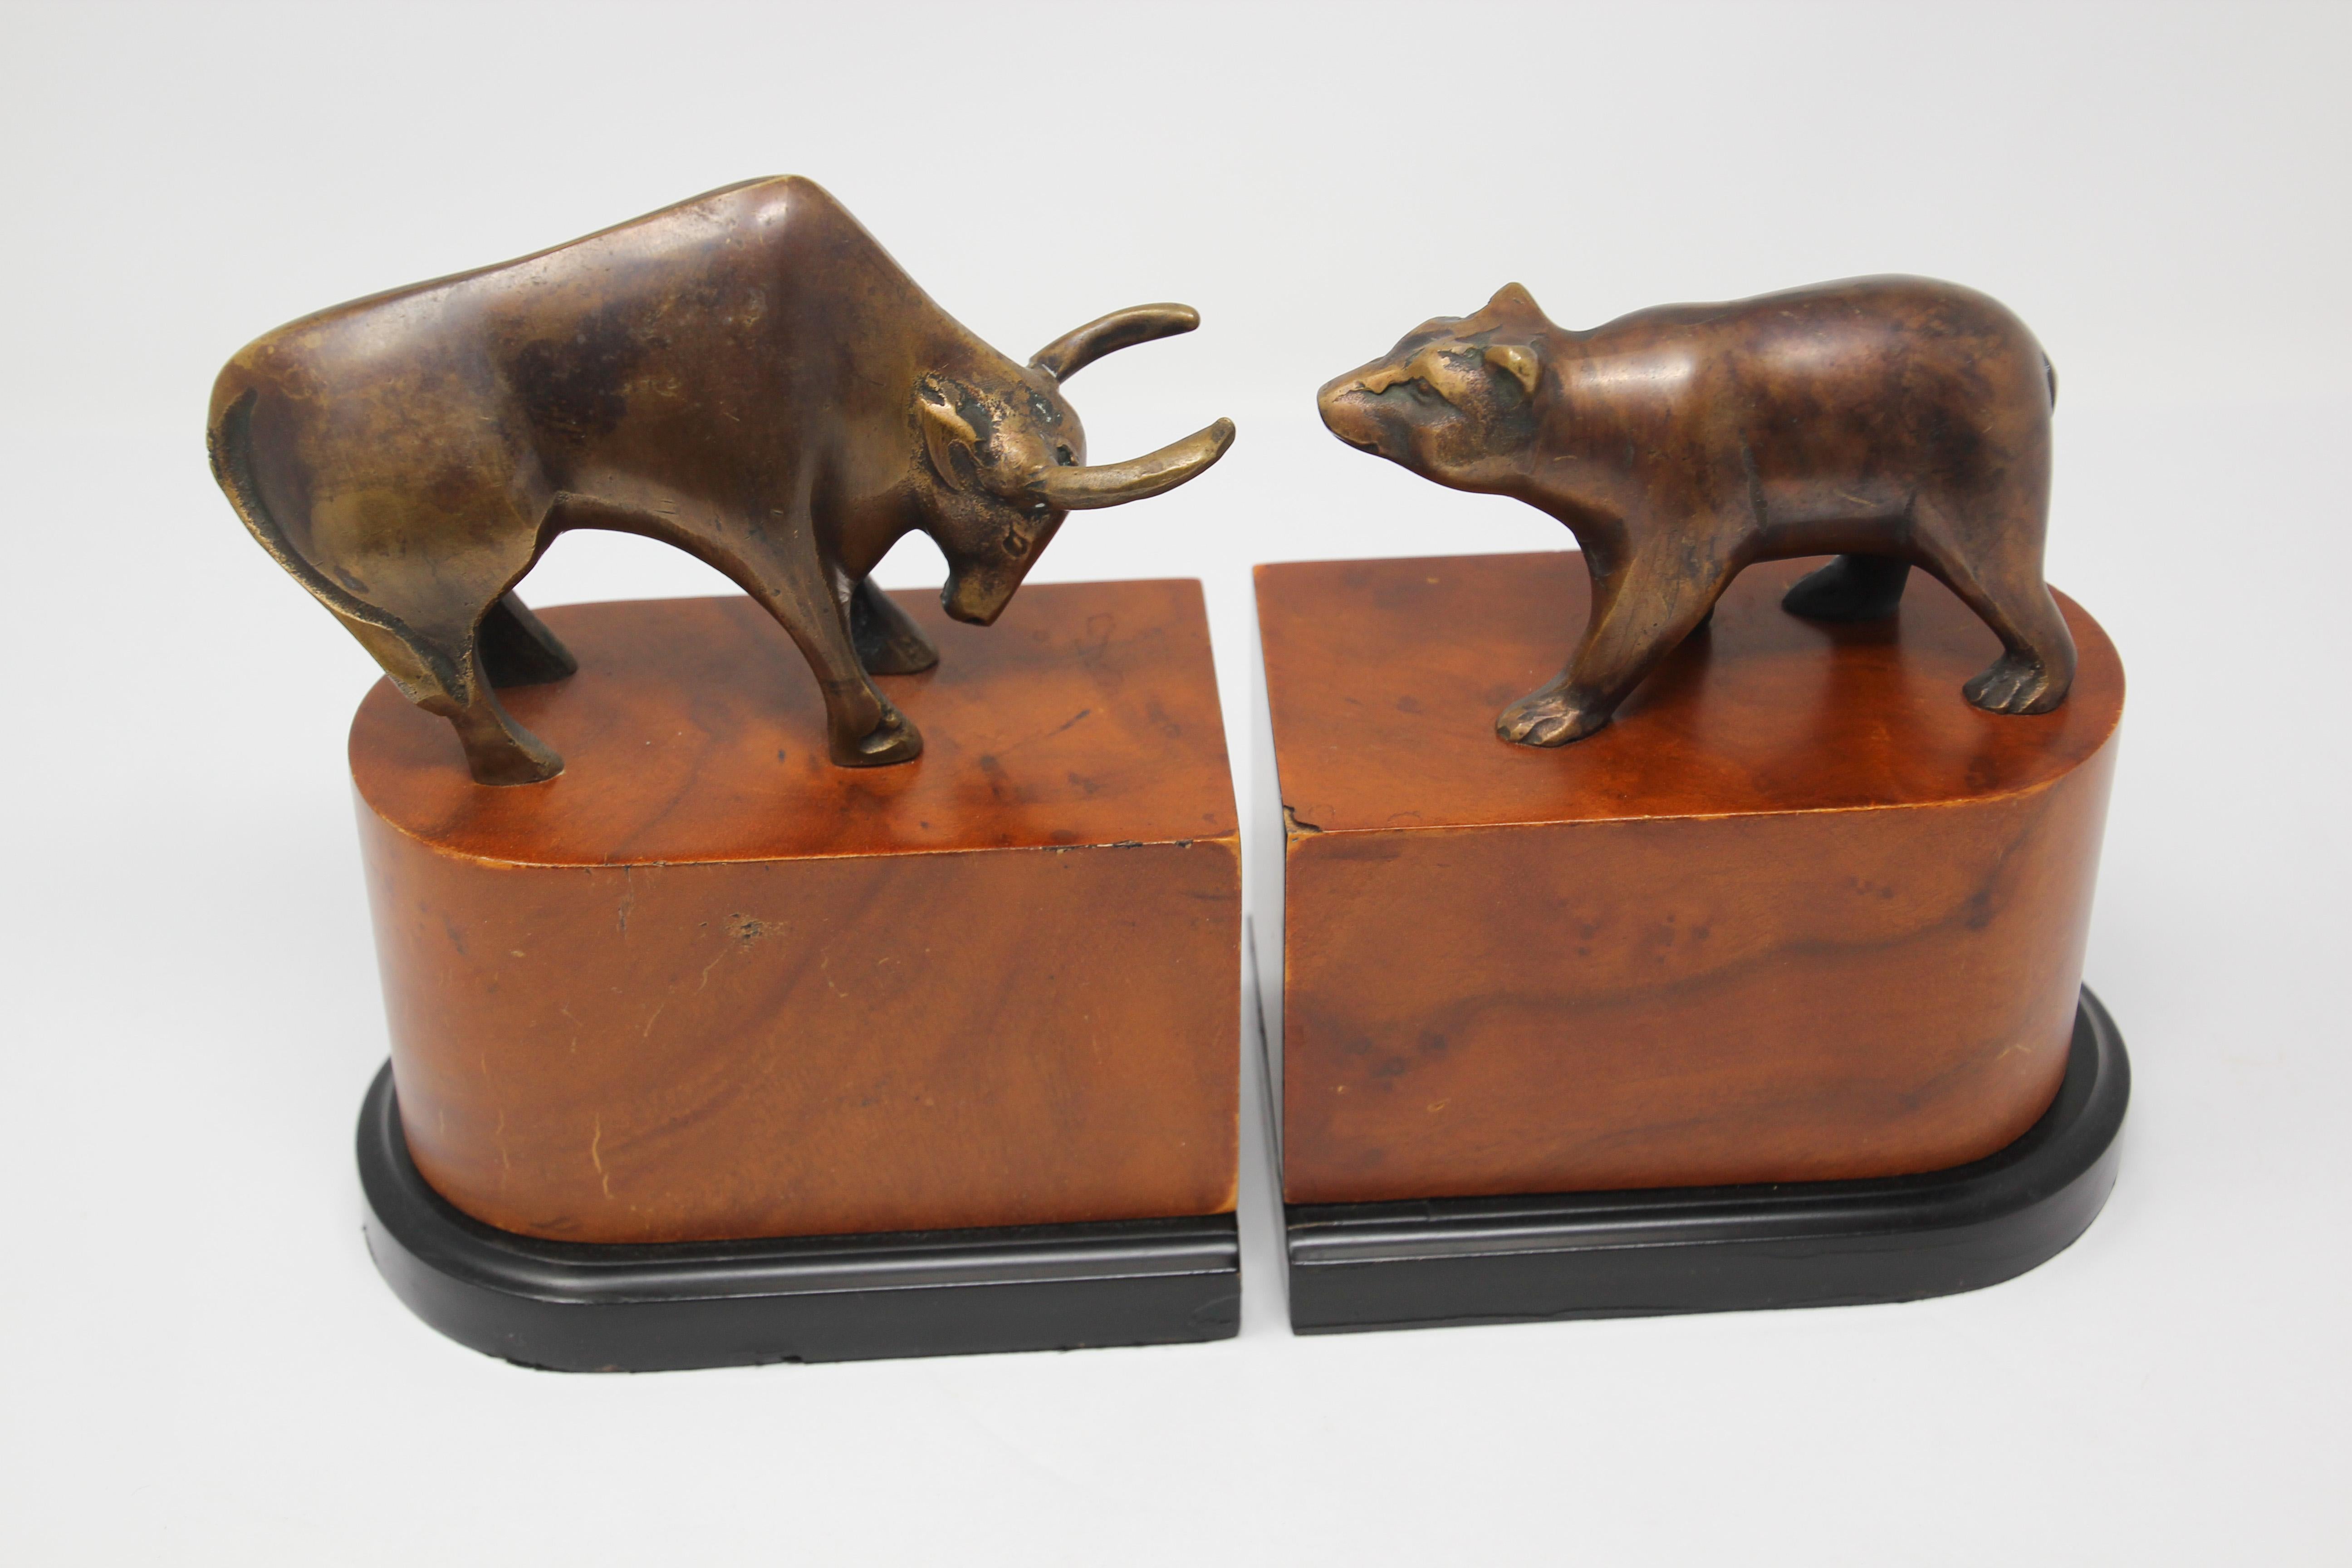 Art Deco style bronze bull and bear bookends.
Great on any desk the polished brass bull and bear on wood stands bookends or paperweights.
Great decorative bronze book ends.
Wall Street bull and bear broker decorative desk decoration.
Great